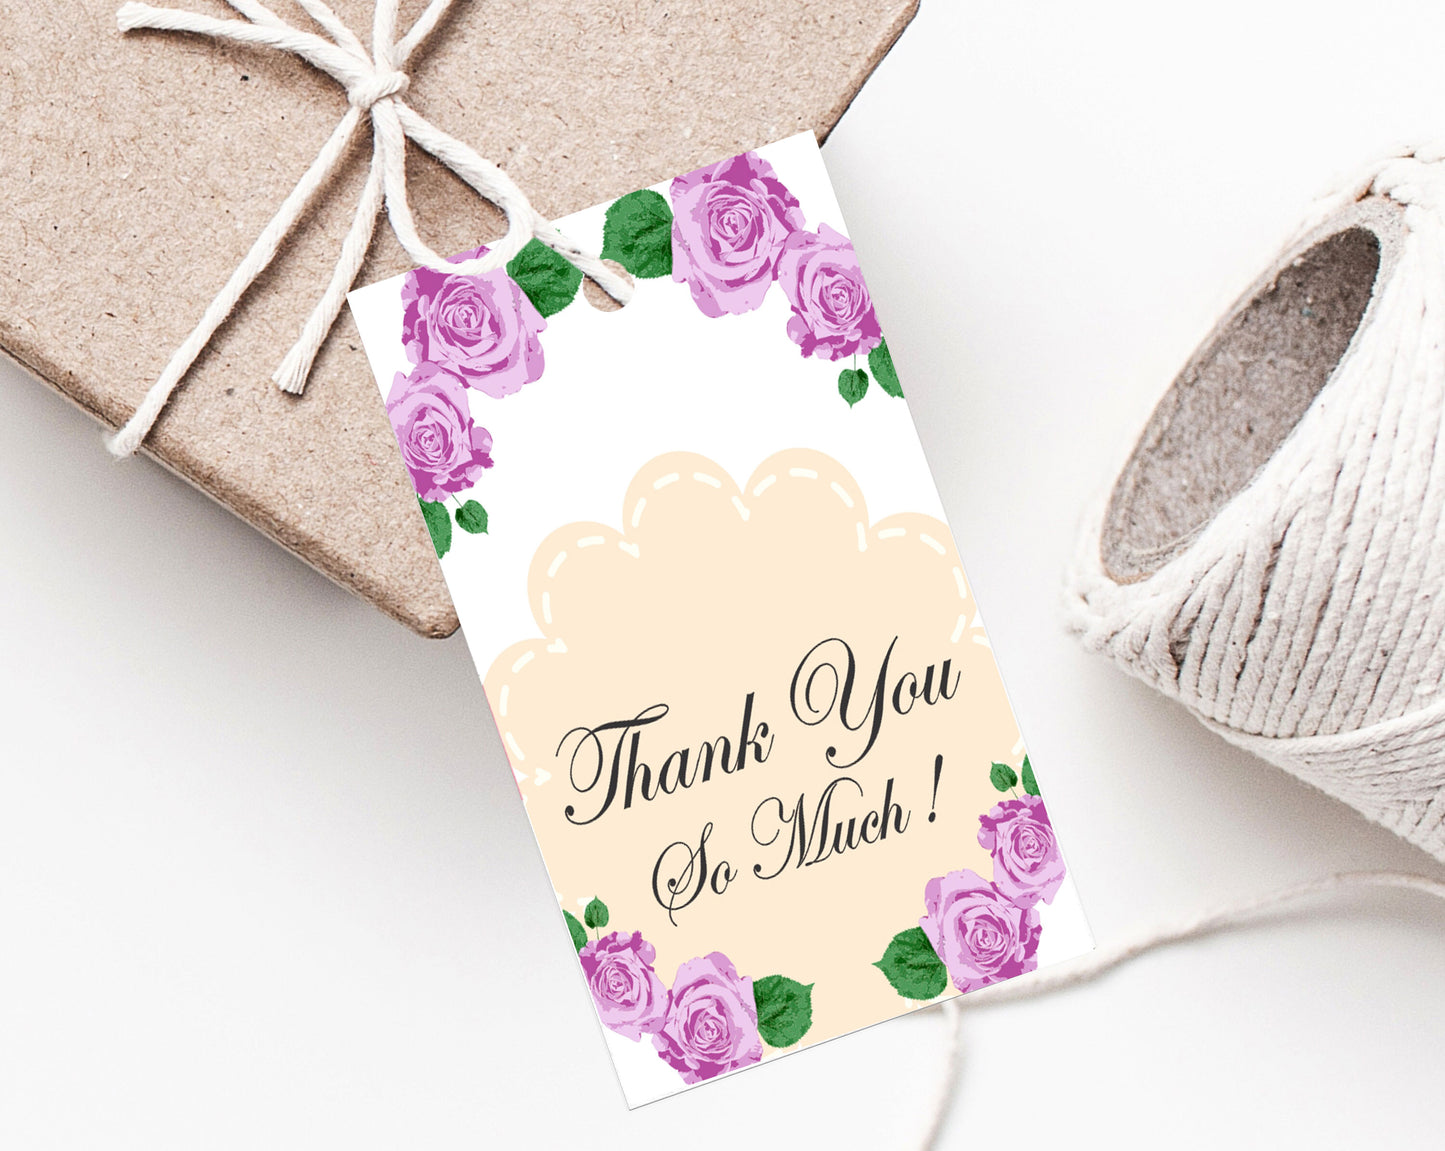 iberry's 100 pcs Thankyou Tags with Thread, Thankyou Tags for Return Gifts, Thankyou Tags for Small Business, Tags for Return Gifts-02